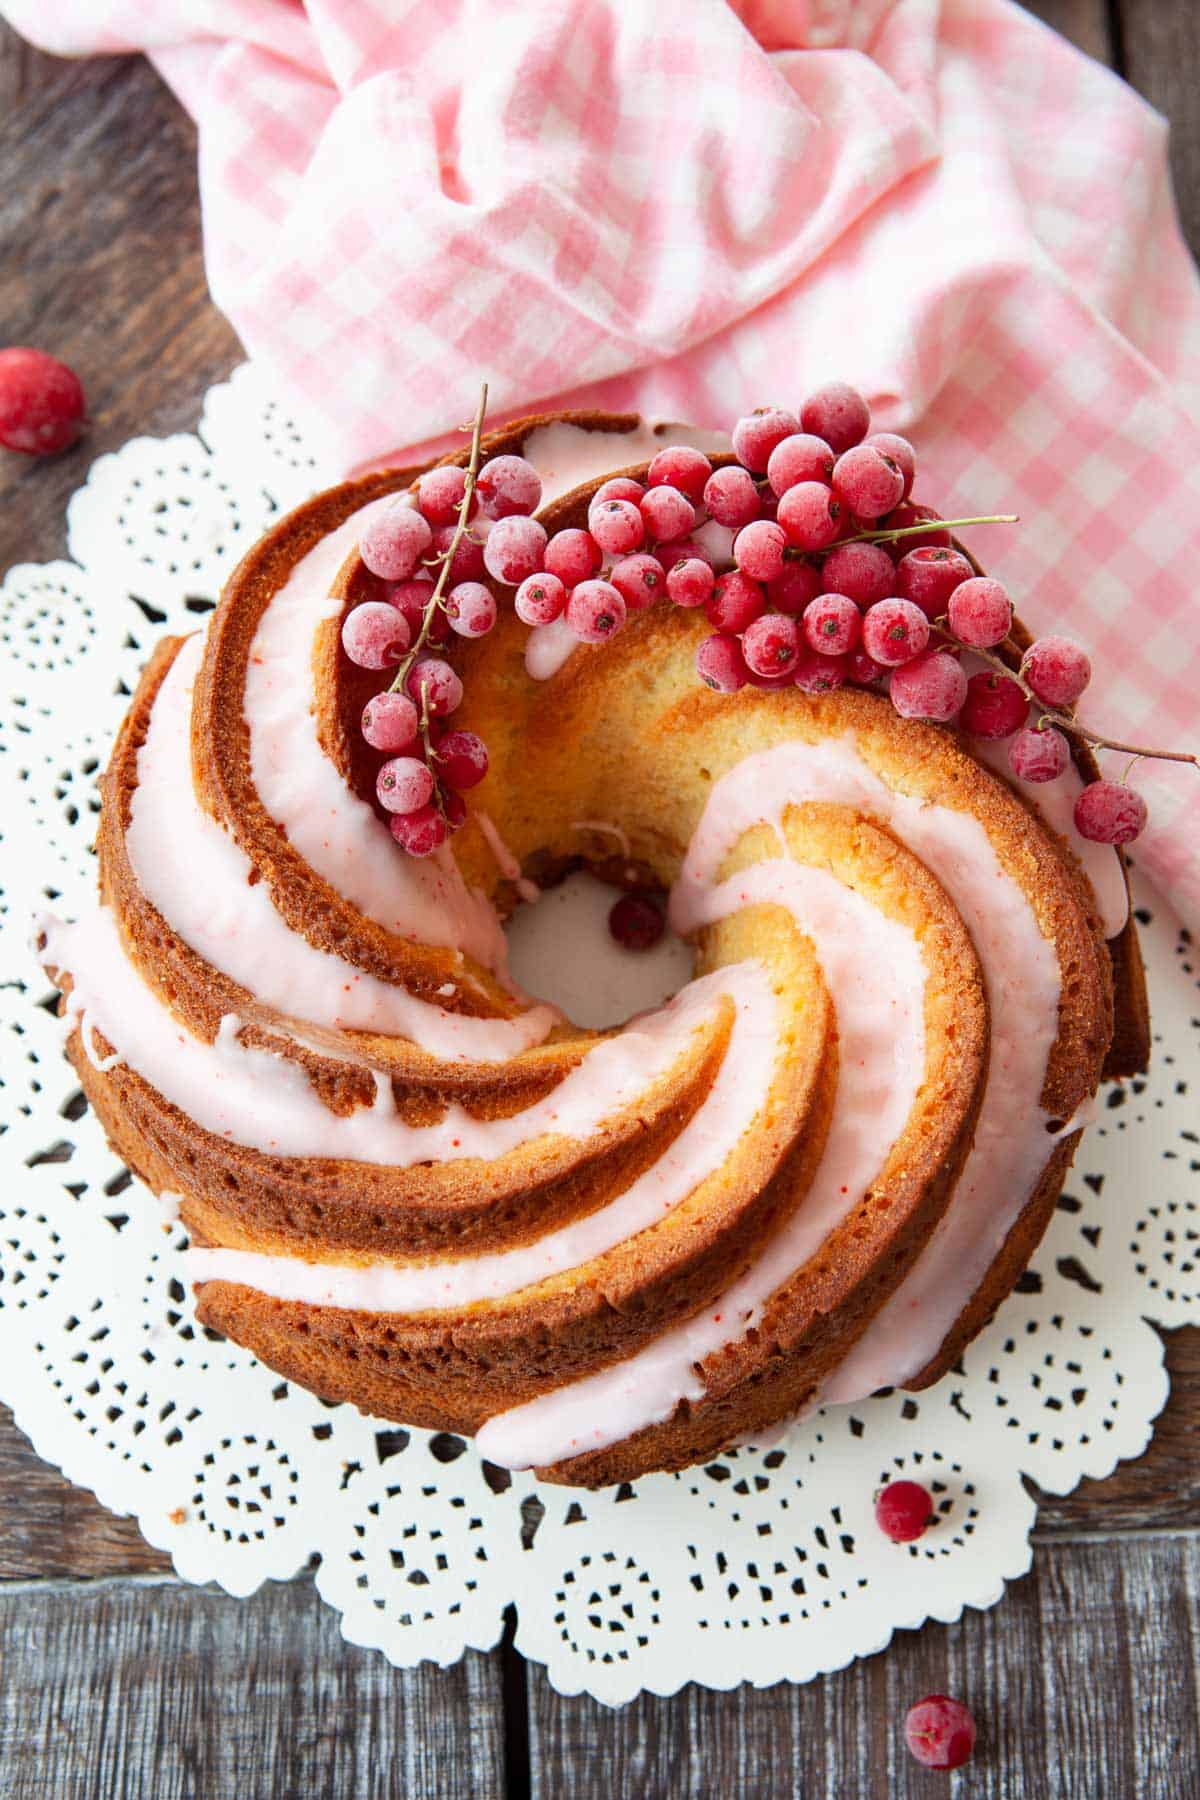 Minimalist Bundt cake with glaze running down the indentations. Fresh berries top a portion of the cake.